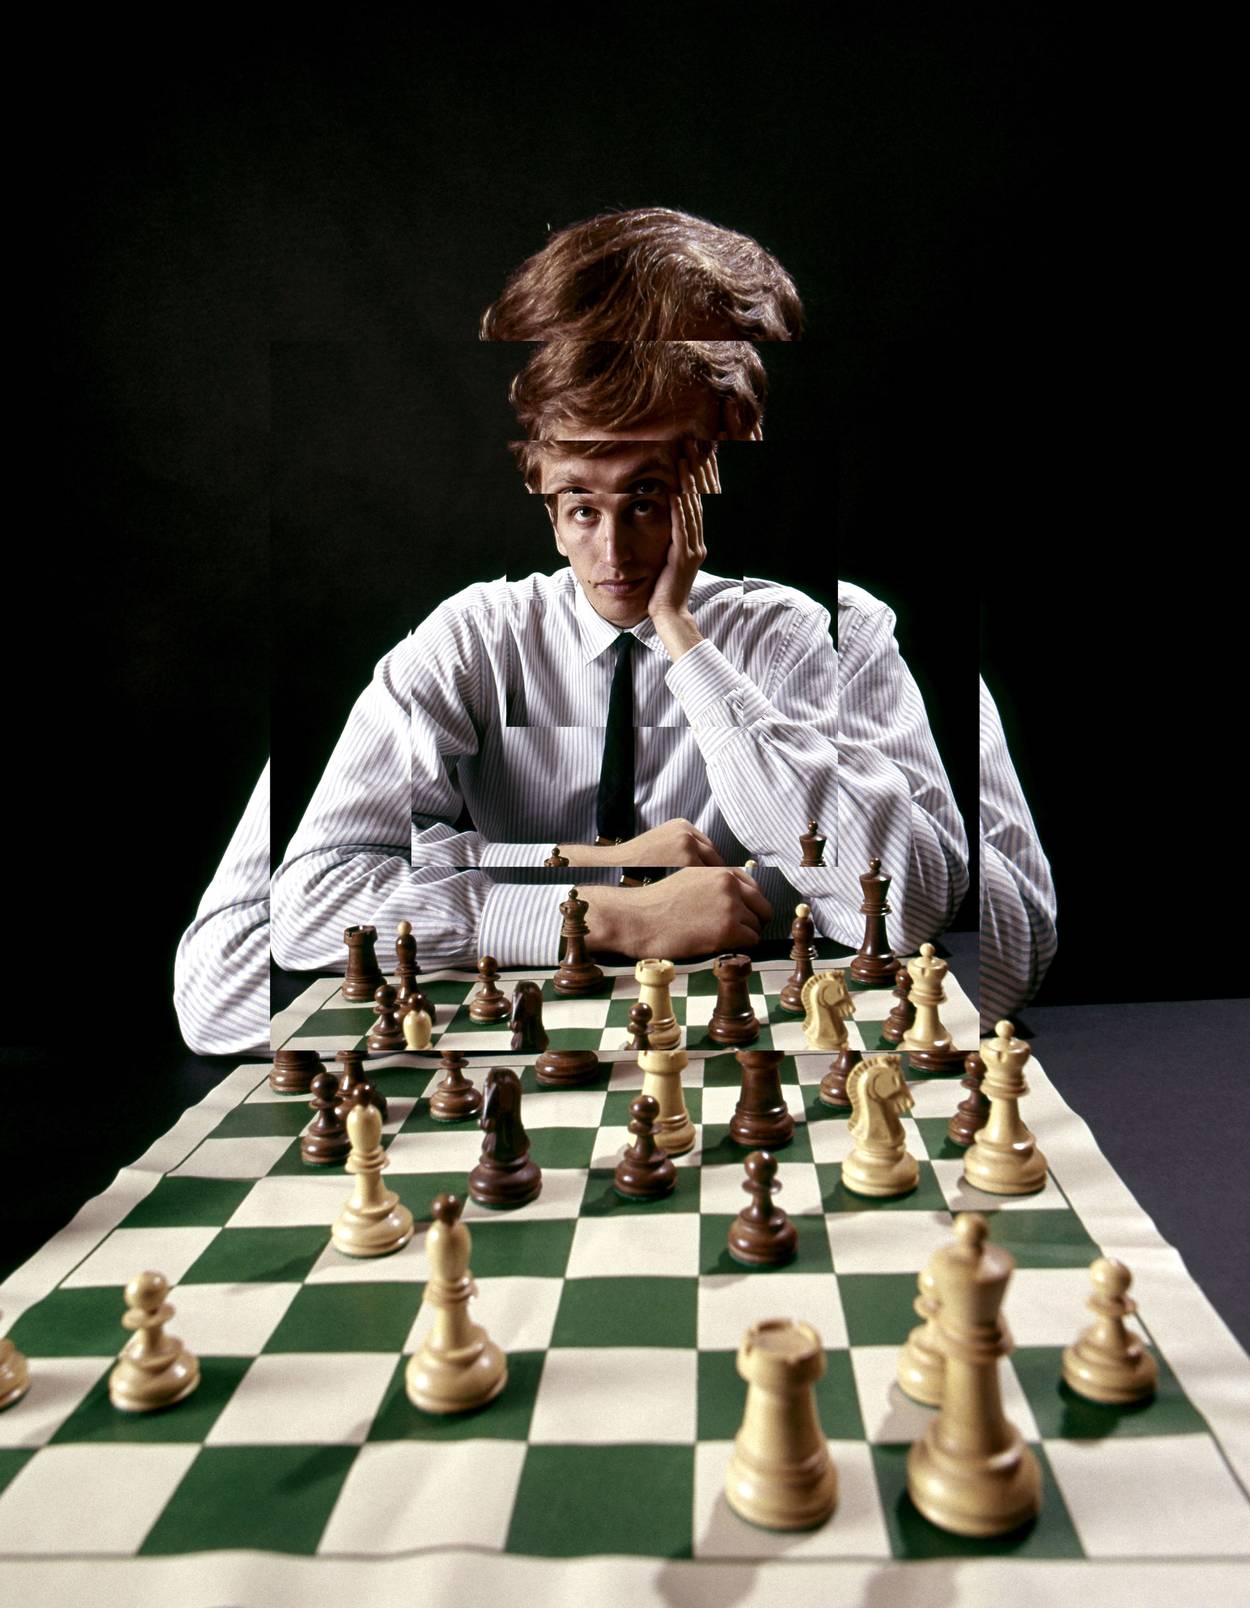 Was there ever a woman who played against Bobby Fischer at Chess